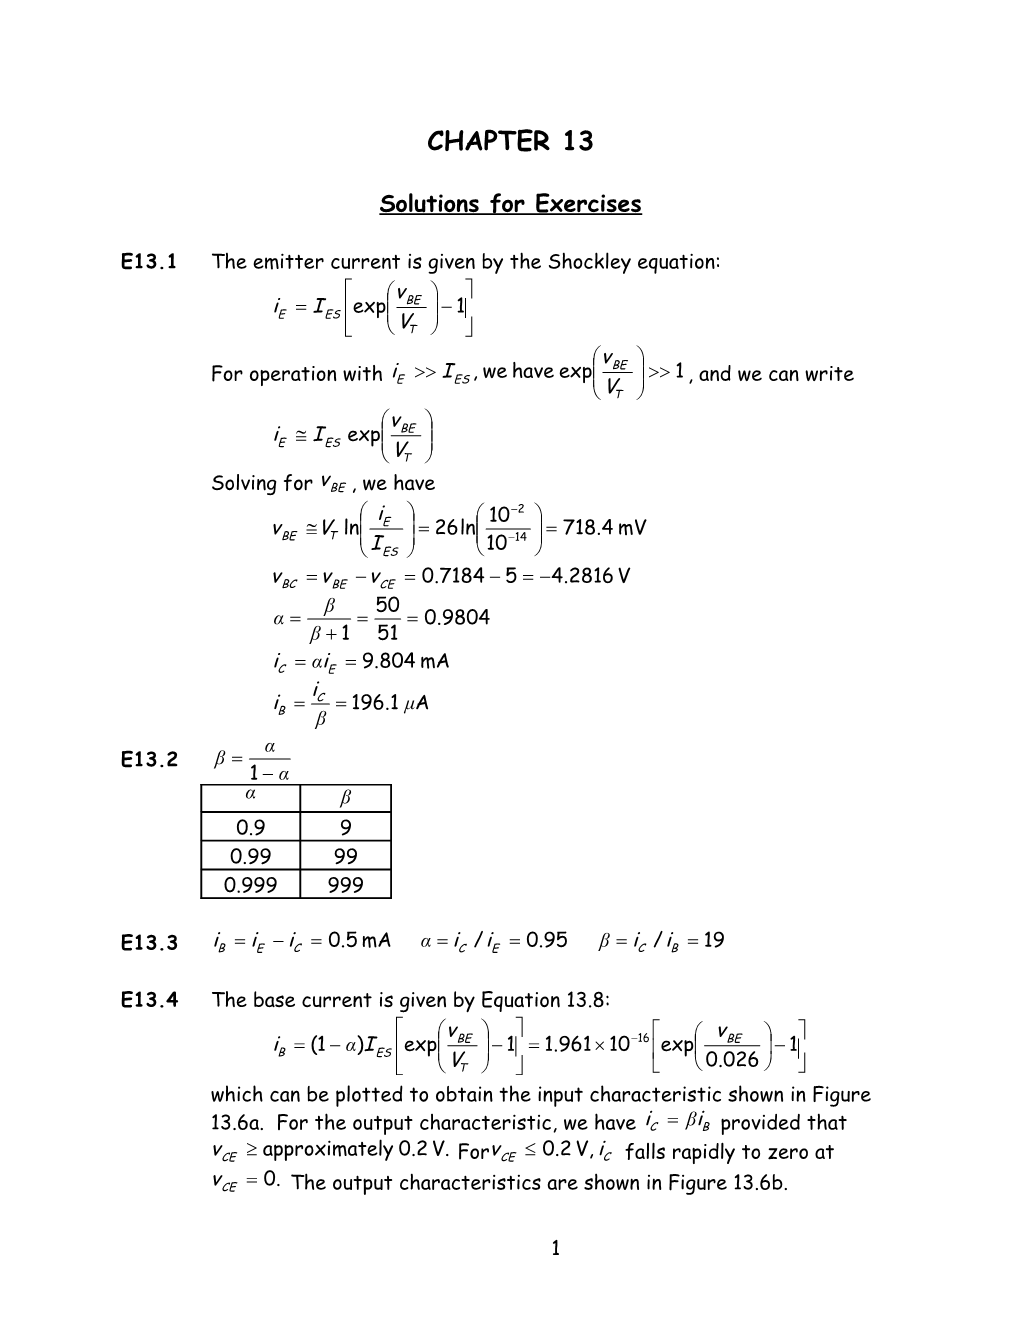 E13.1 the Emitter Current Is Given by the Shockley Equation